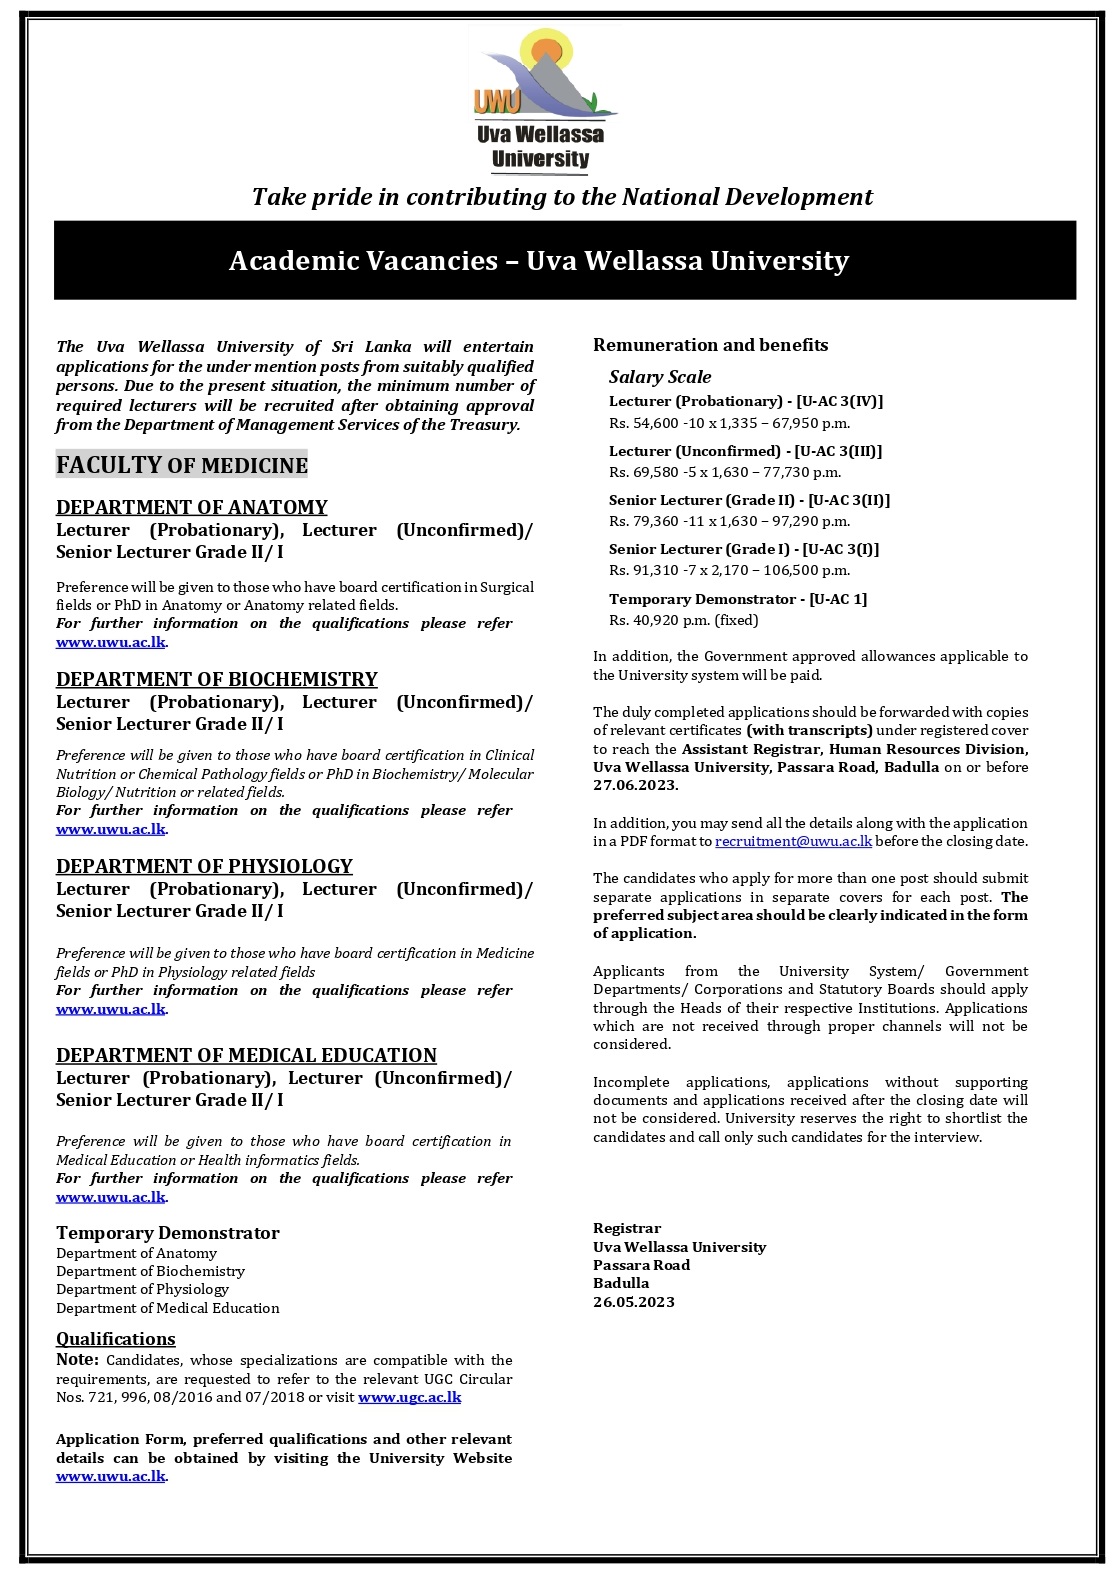 Paper Advertisement- Faculty of Medicine_page-0001